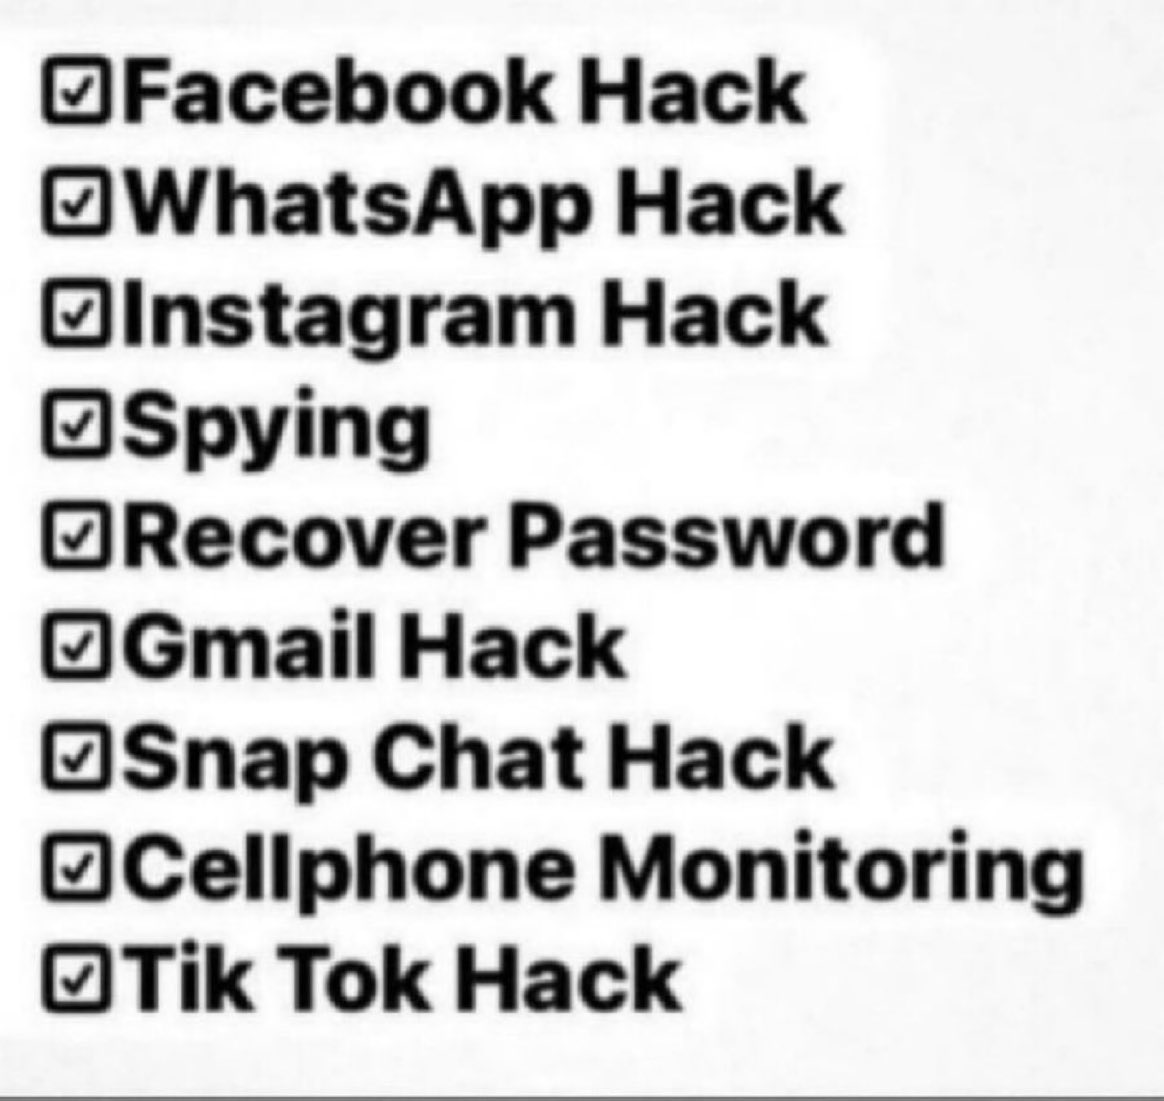 Compared to other cases I've dealt with, yours is less complicated.
So if you want your account back, message me. I'm available around-the-clock for all hacking services.
#Hack #coinbase #Hacking #NFTkid #BEP2 #snapchat #snapchatsupport #NFT